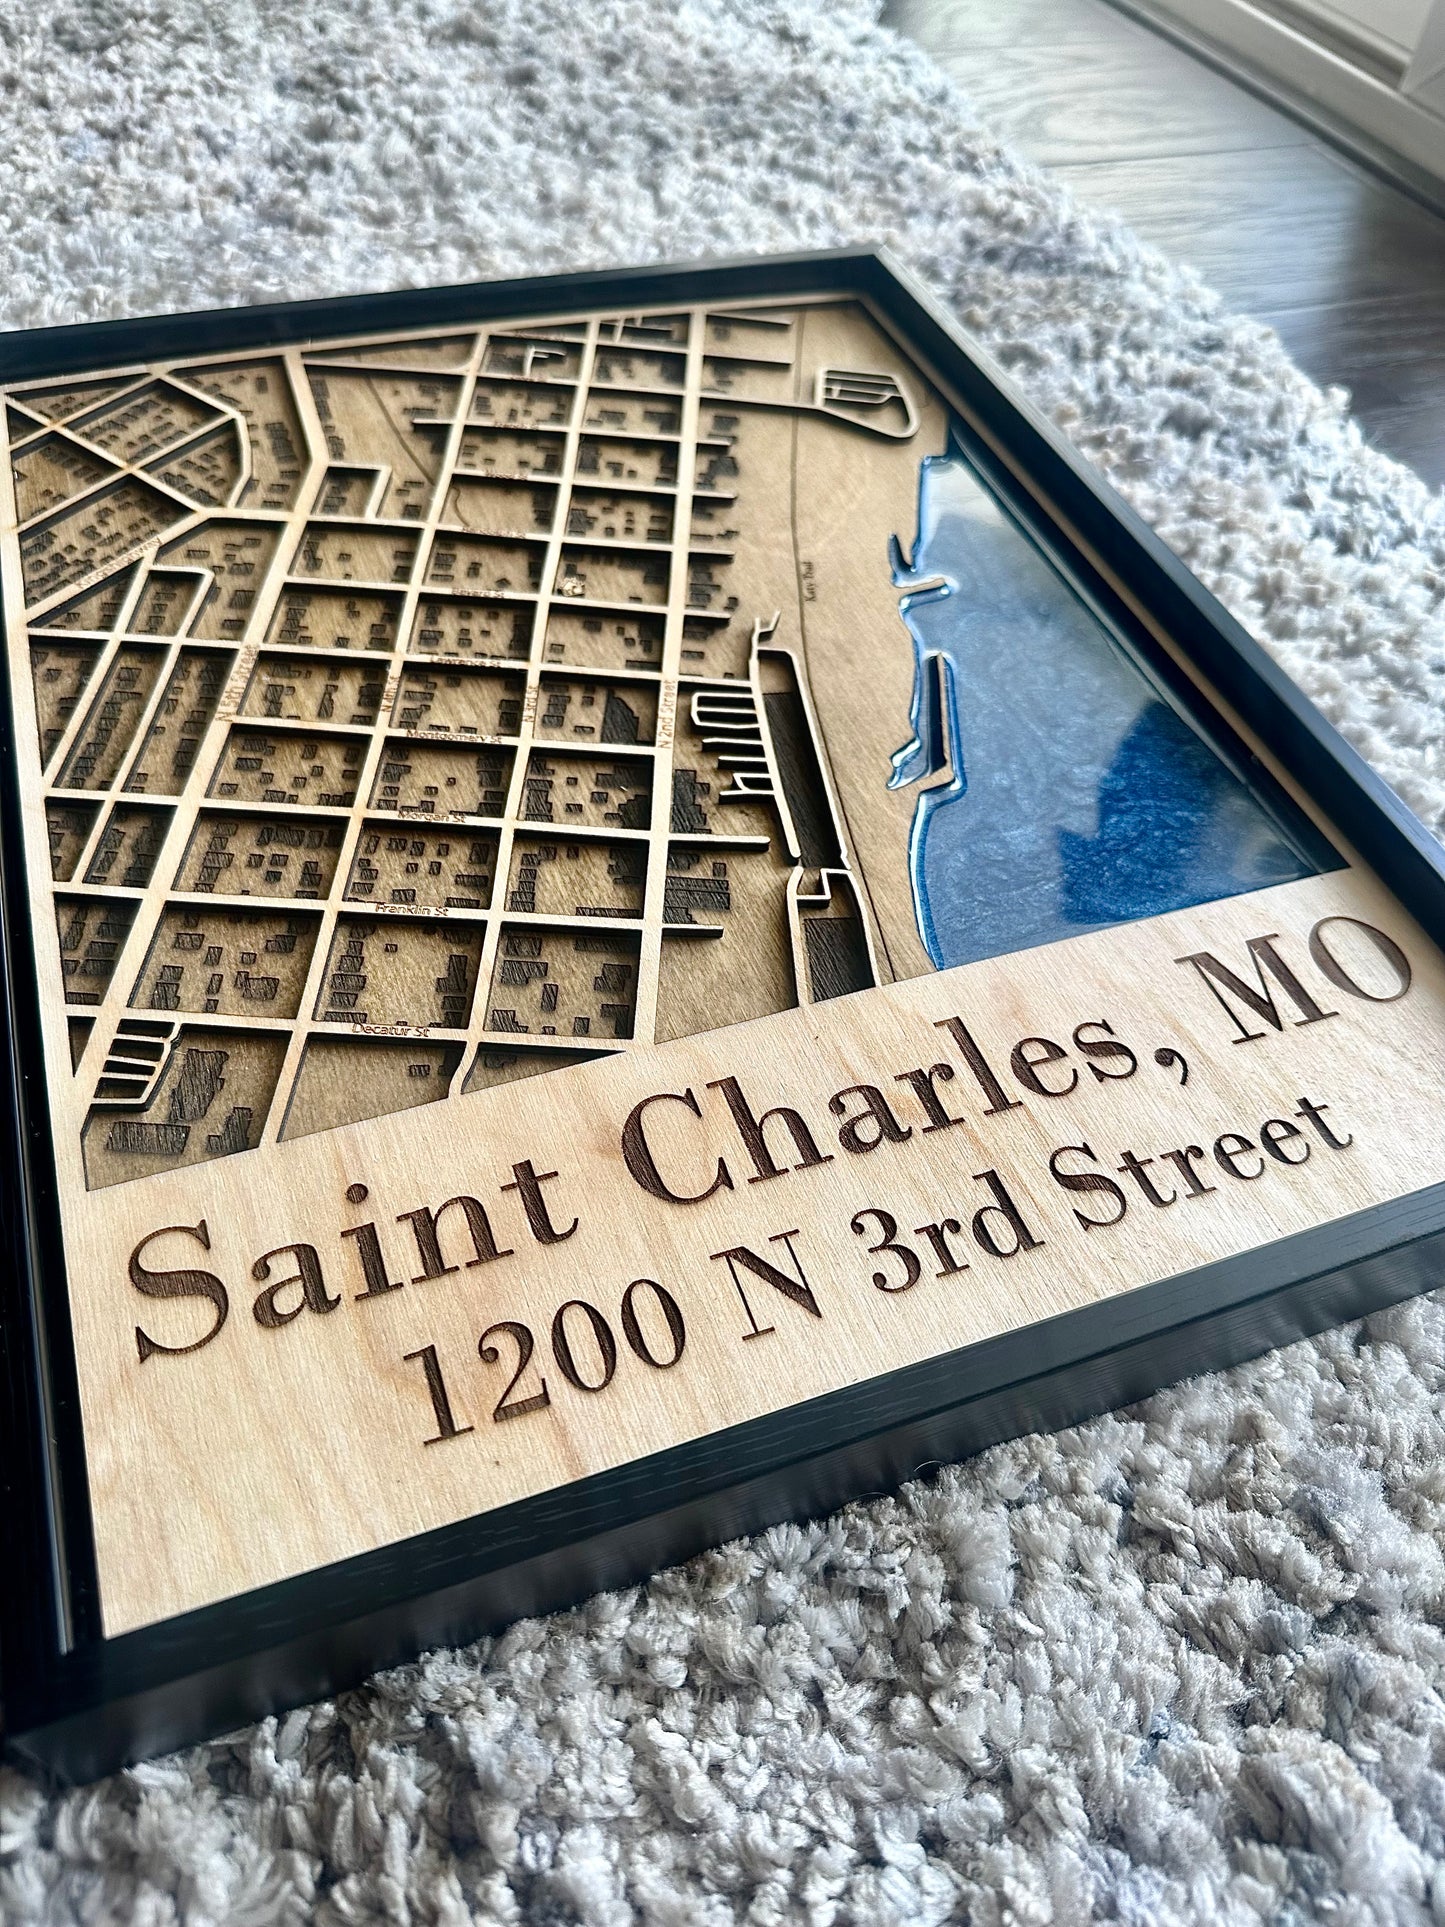 3D Maps with Resin